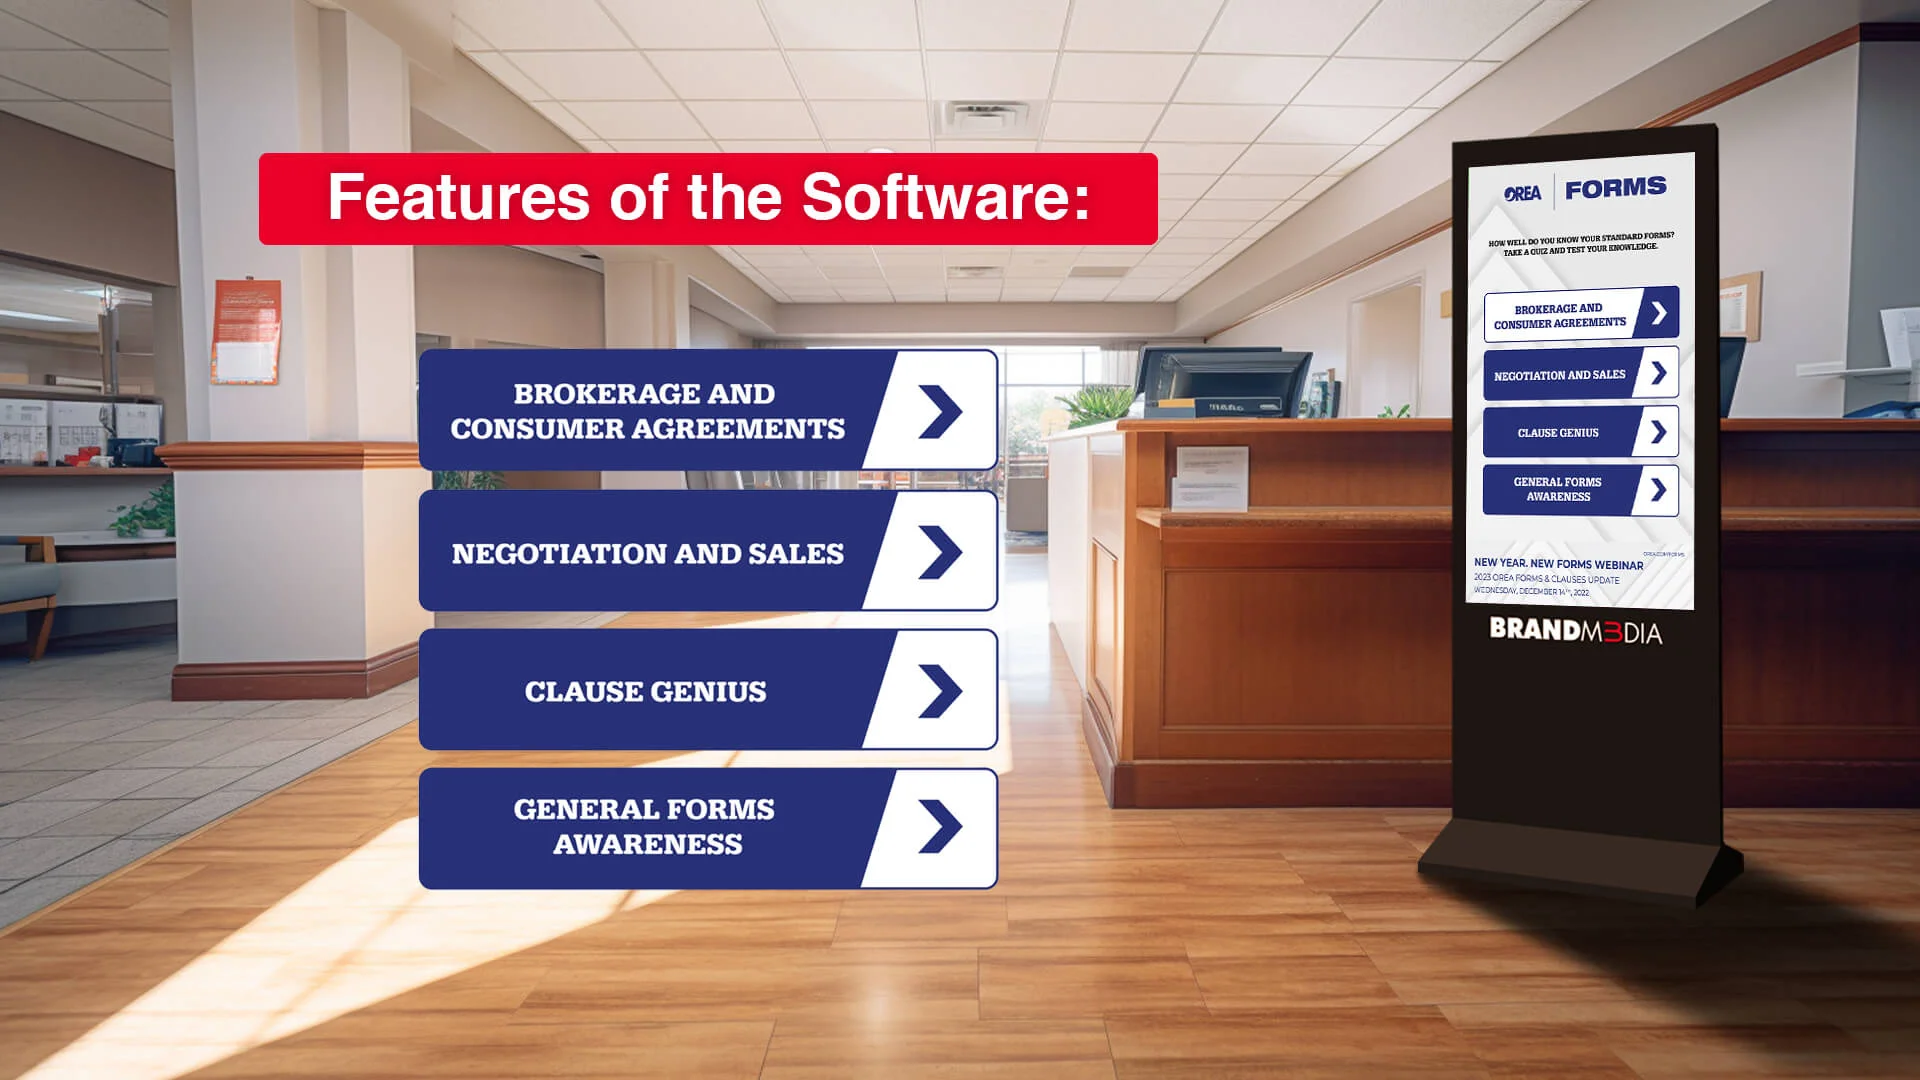 Brandm3dia- features of the software